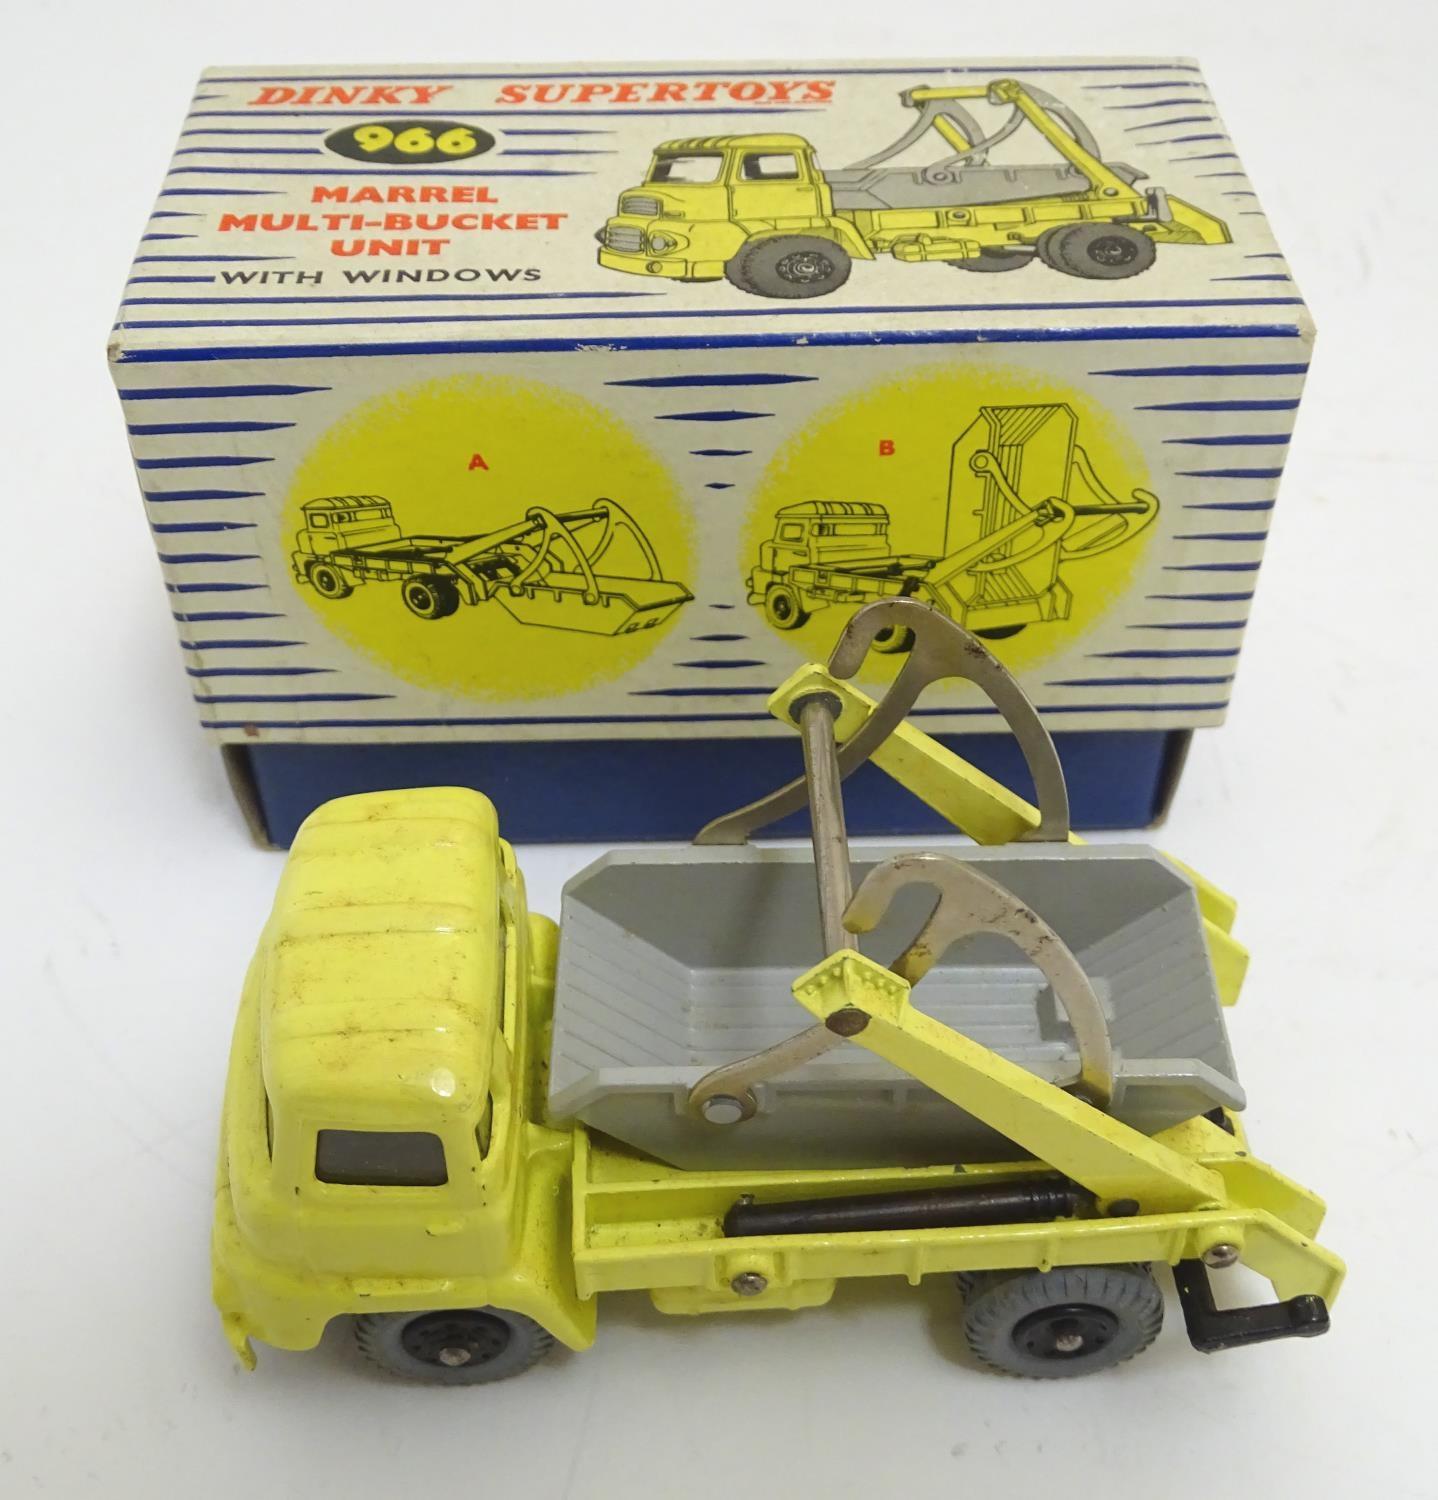 Toy: A Dinky Supertoys die cast scale model Marrel Multi Bucket Unit with windows, model no. 966. - Image 3 of 6